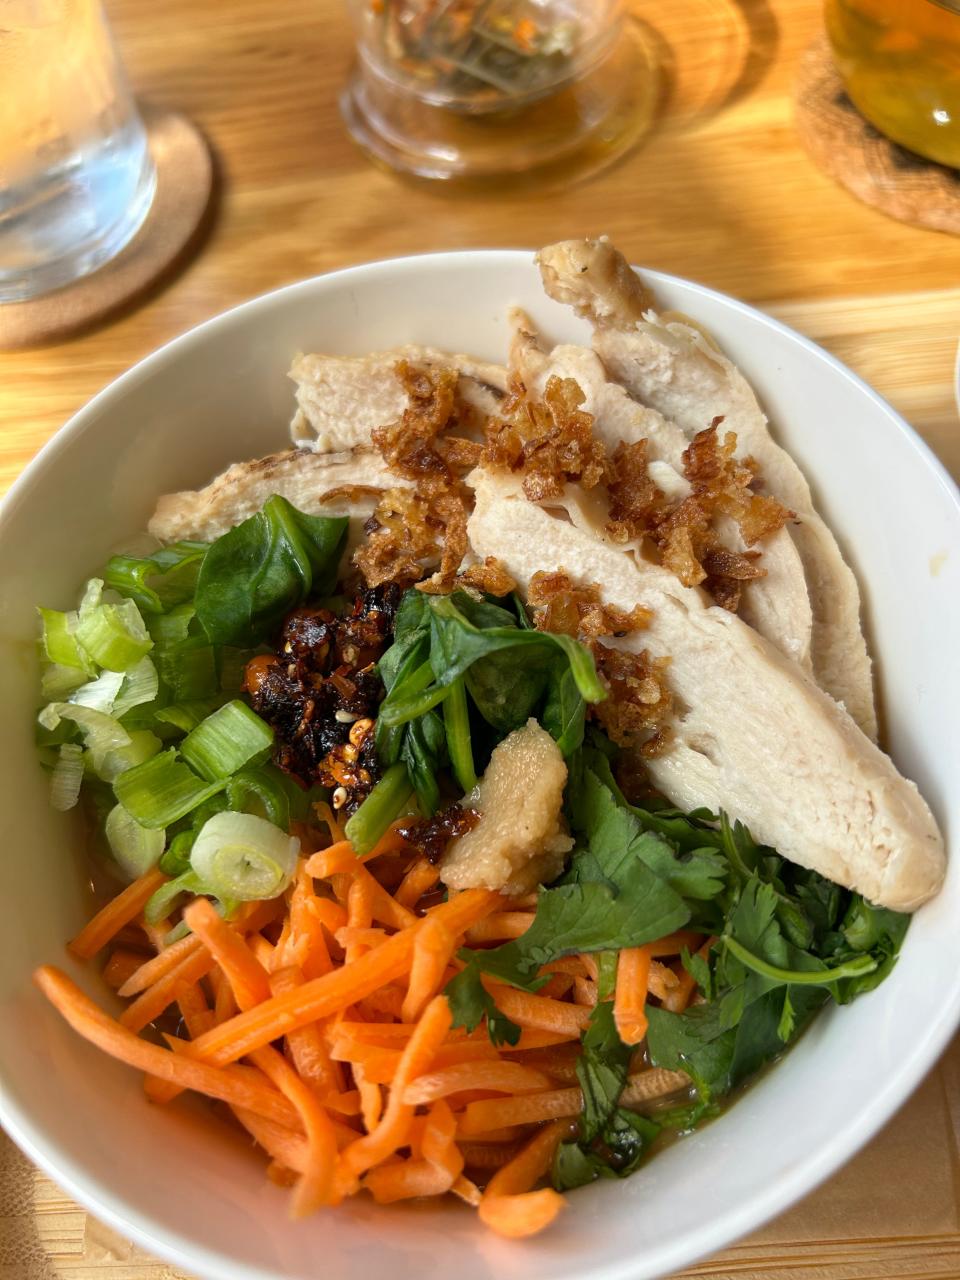 Ramen with grilled chicken is topped with scallions, shredded carrots, cilantro, crispy onions, garlic and crushed chili flakes in olive oil at SRINA.